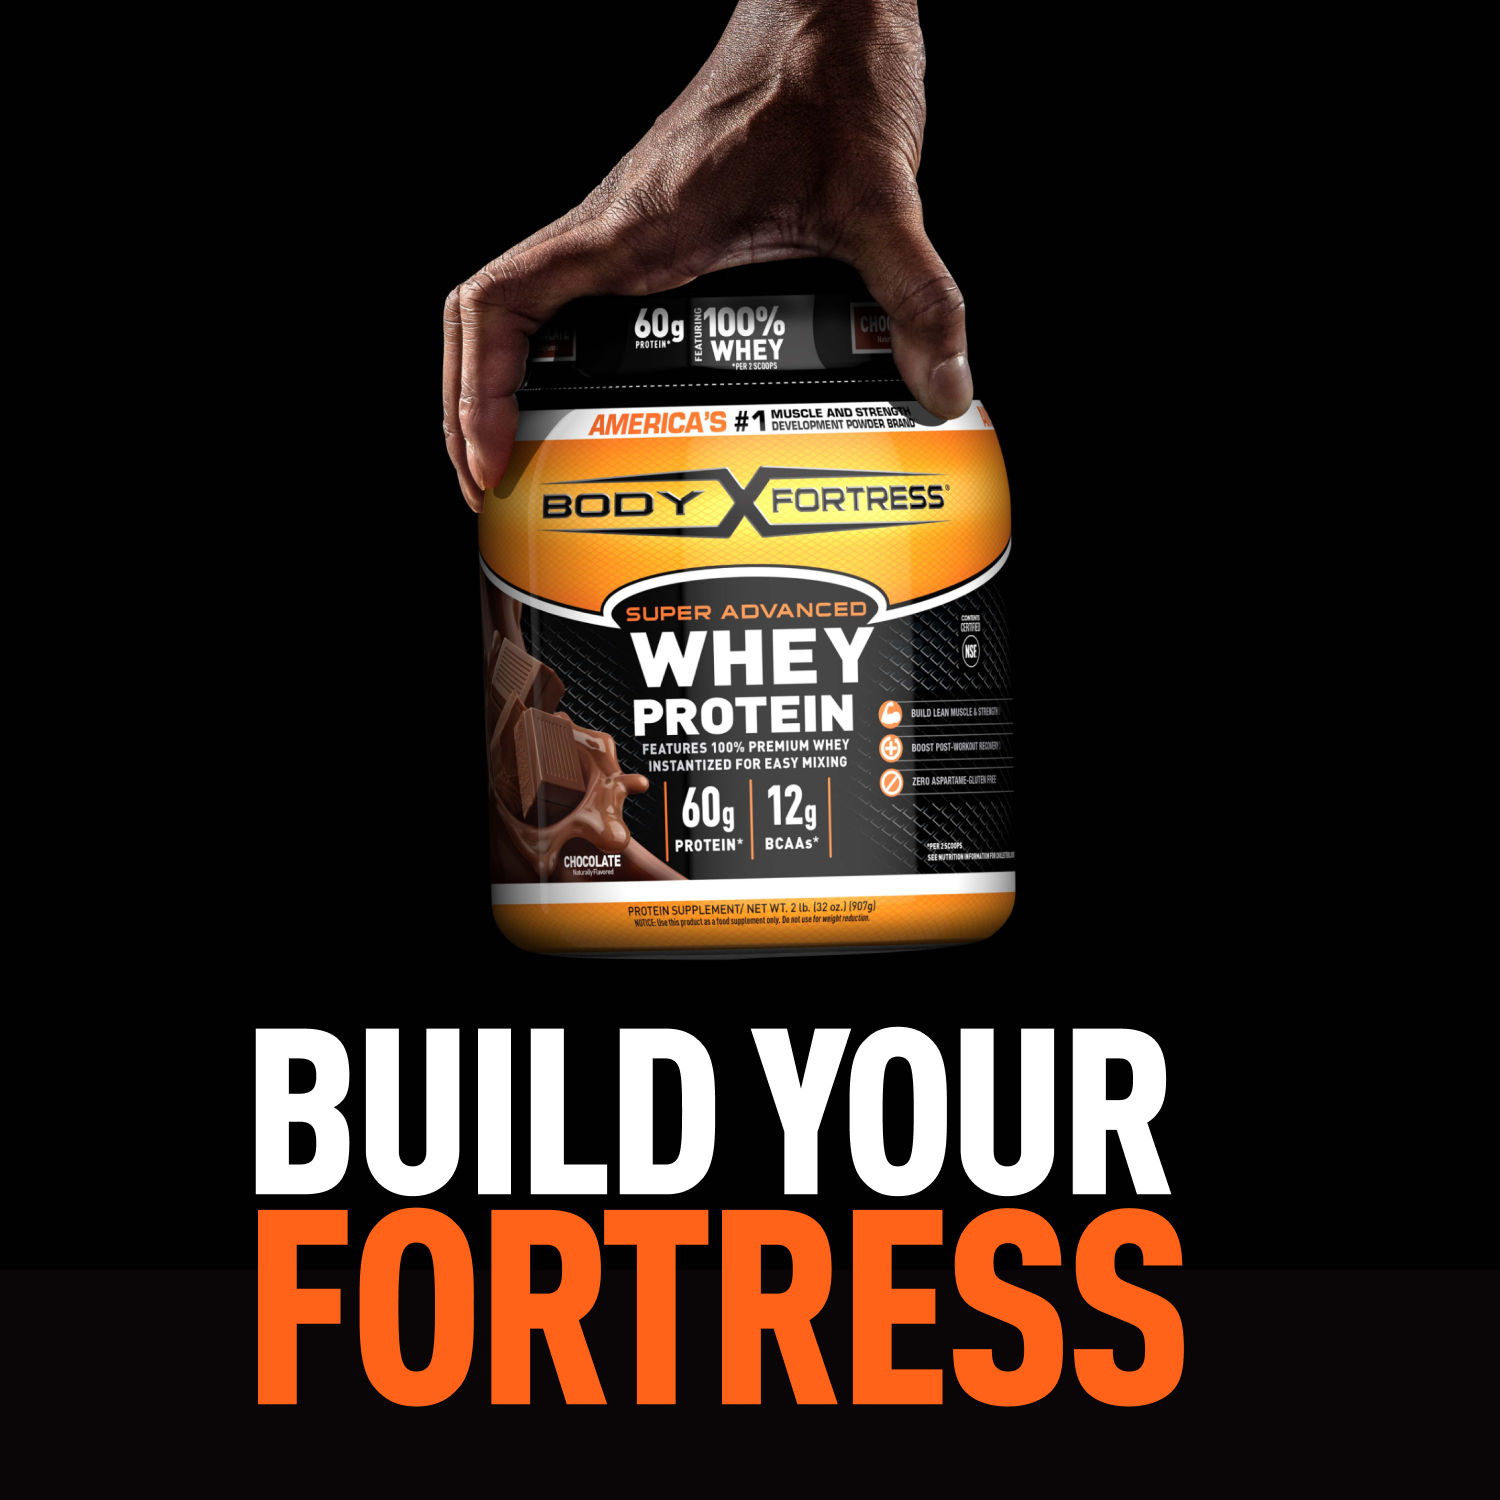 Body Fortress Super Advanced Whey Protein Powder, Chocolate, 60g Protein, 2lb, 32oz - image 5 of 7